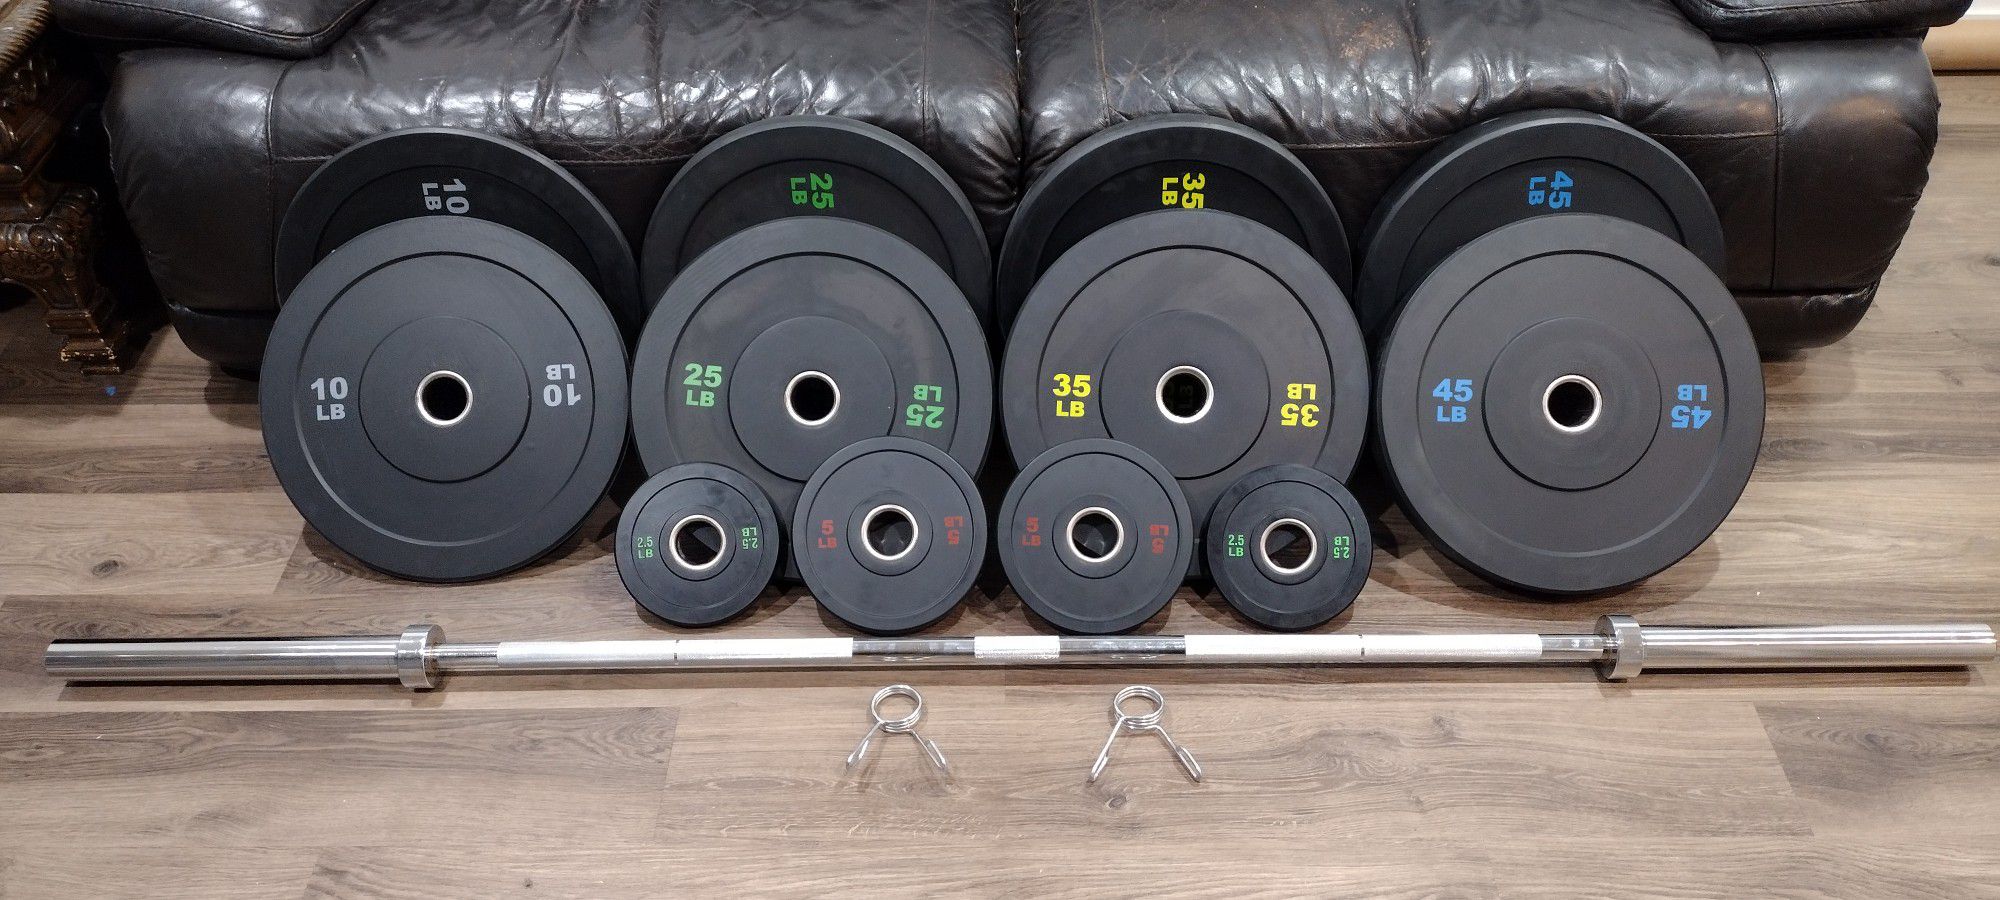 OLYMPIC  BARBELL BAR  7ft.
 45lb. AND OLYMPIC BUMPER
  WEIGHT  PLATES.
